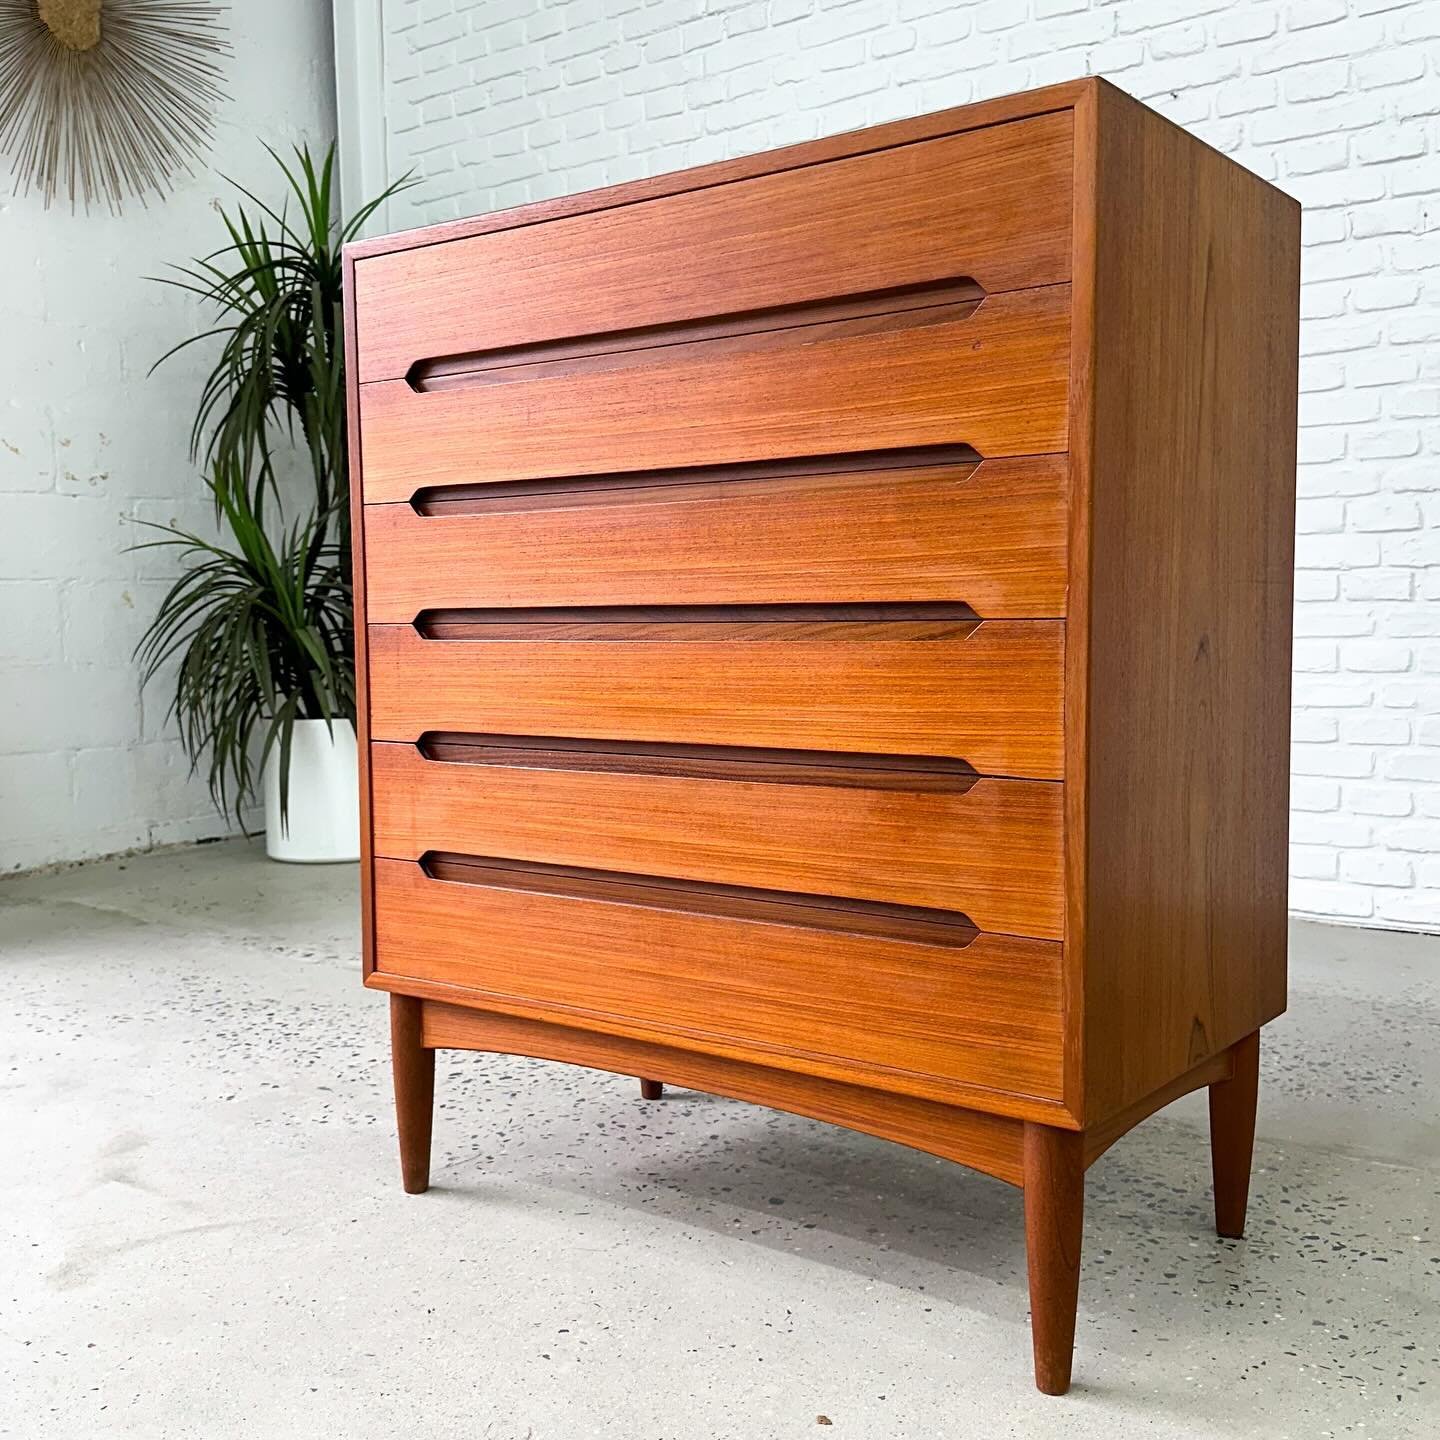 Quality Danish craftsmanship on this petite teak highboy dresser, by E.W. Bach, circa early 1960s. Dovetailed drawers, mitered edges, and that understated negative space pull. 😍 Just so damn good.

Overall great condition with one small mark on the 